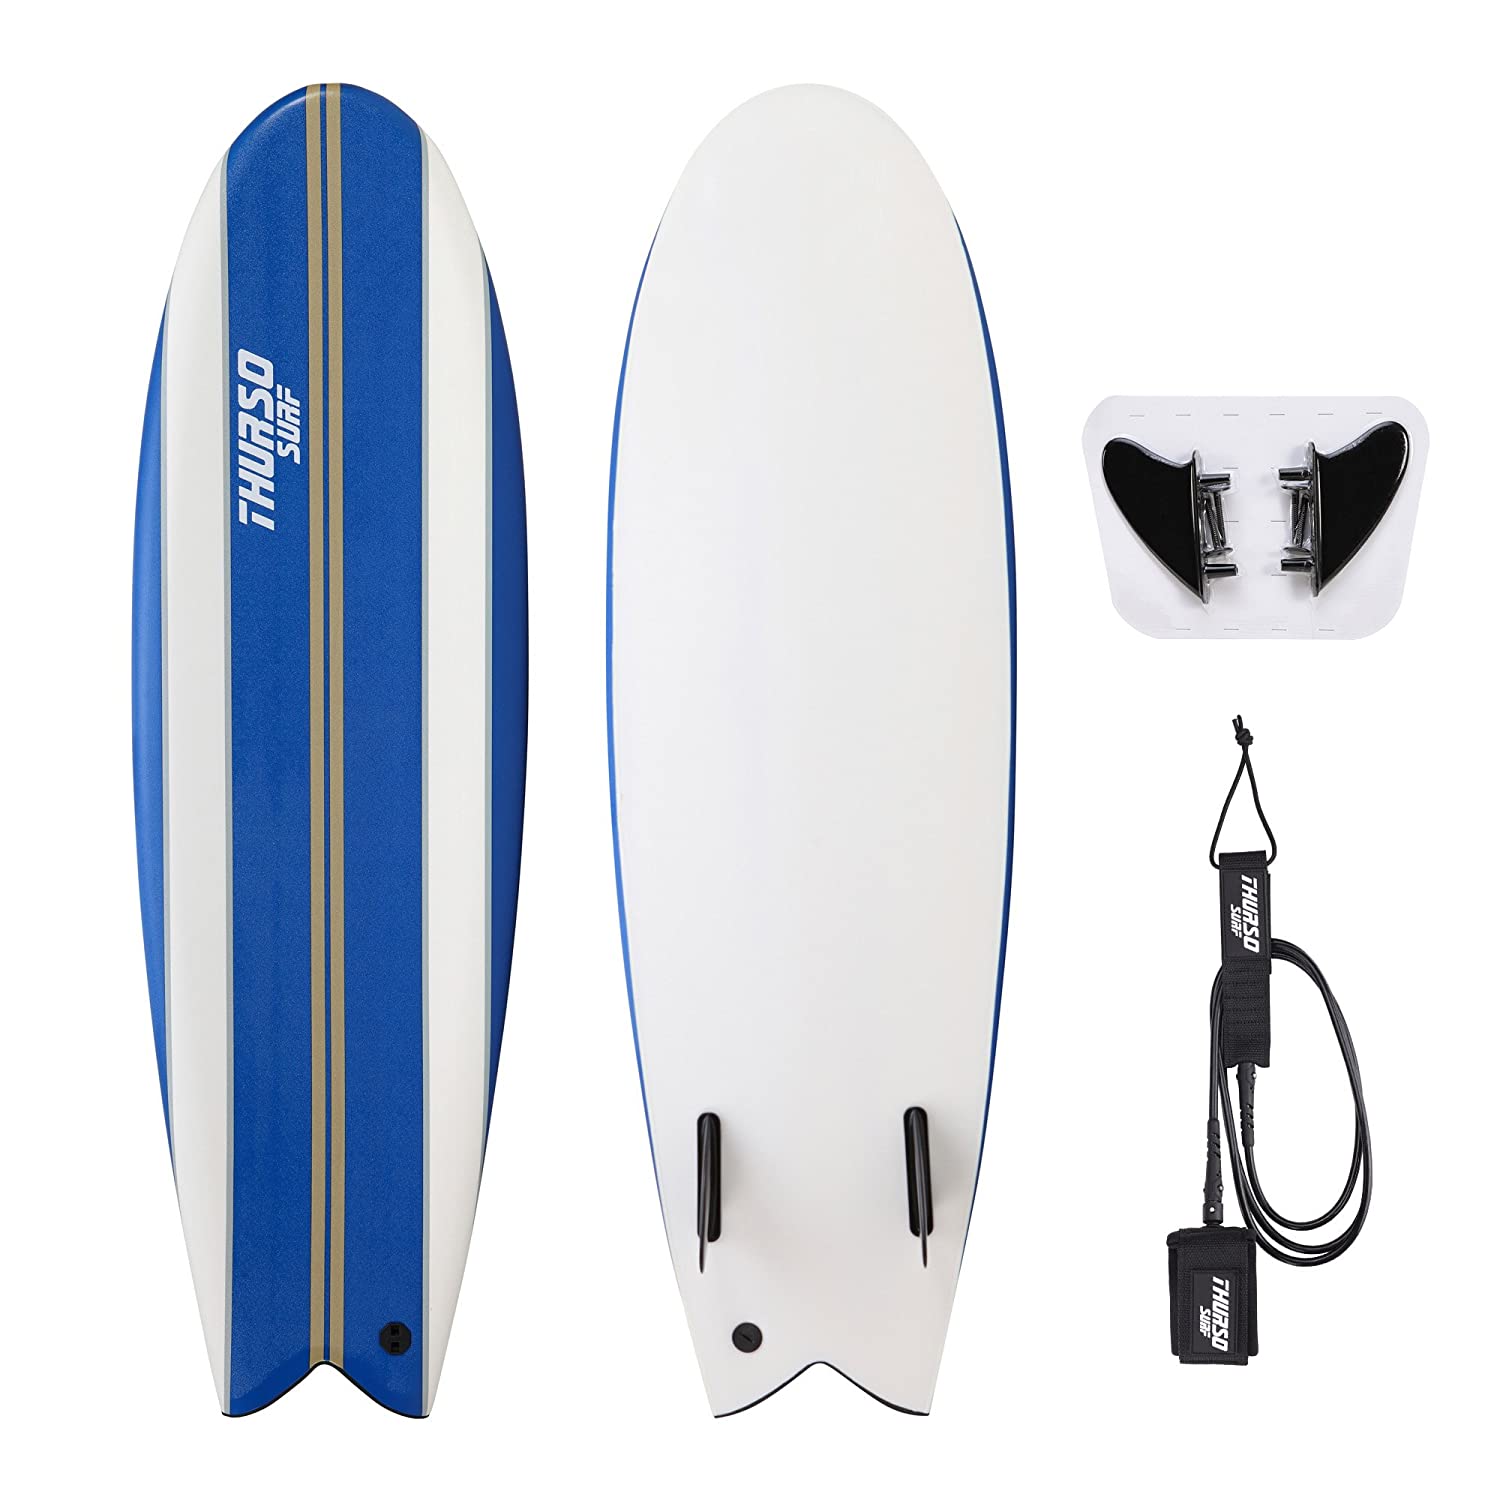 THURSO SURF Lancer 5'10'' Fish Soft Top Surfboard Package Includes Twin Fins Double Stainless Steel Swivel Leash EPS Core IXPE Deck HDPE Slick Bottom Built in Non Slip Deck Grip